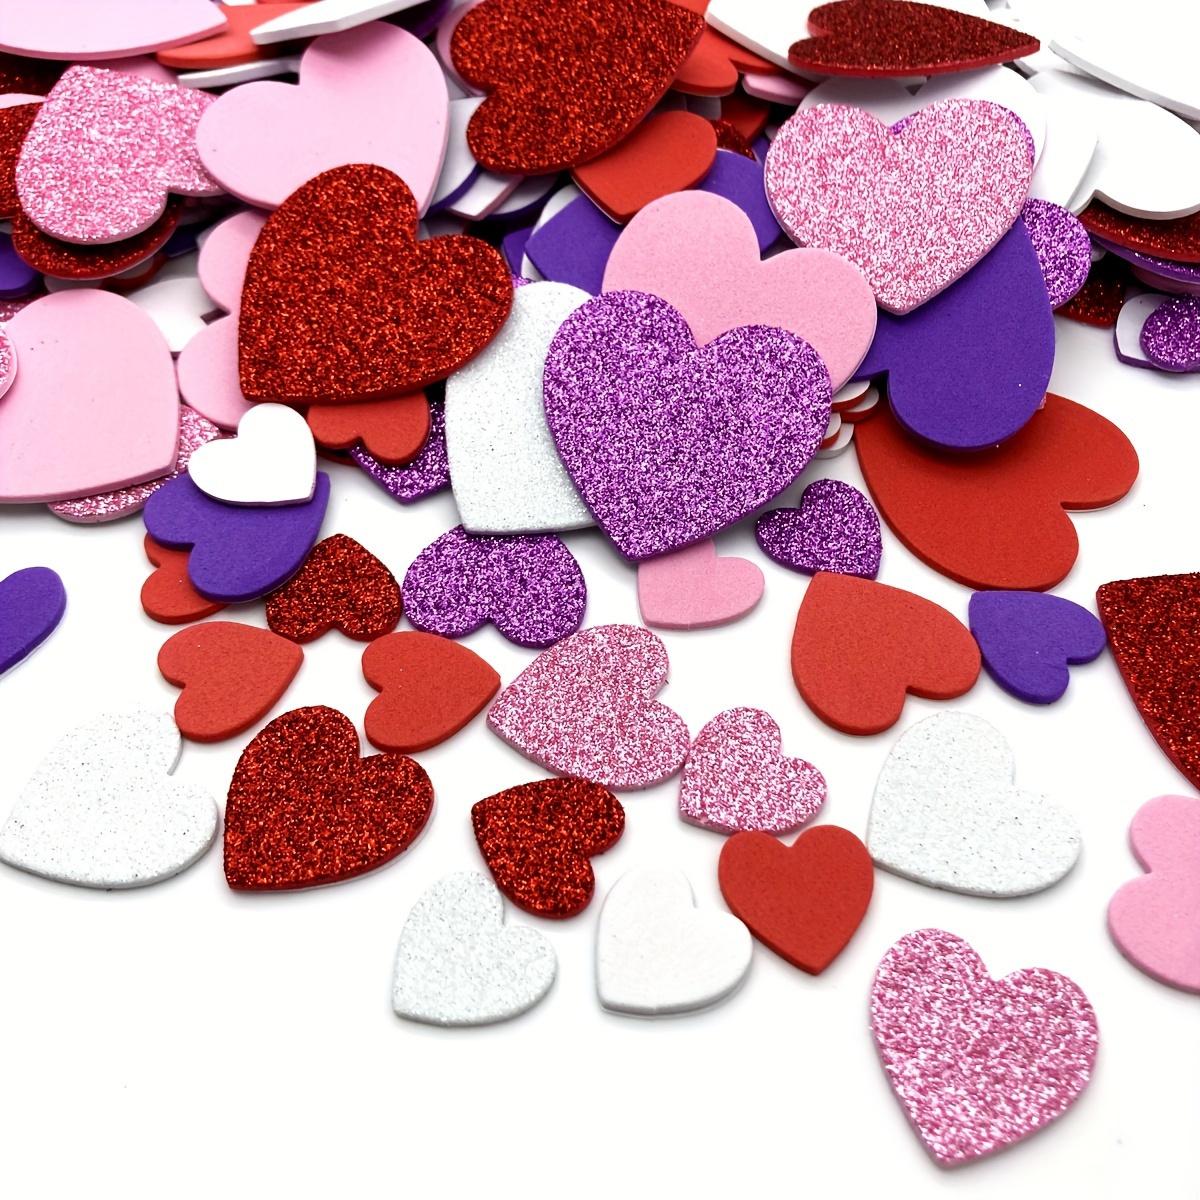 Hot Pink Heart Stickers Valentine's Day Crafting Scrapbooking 1.5 Inch 500  Adhesive Stickers